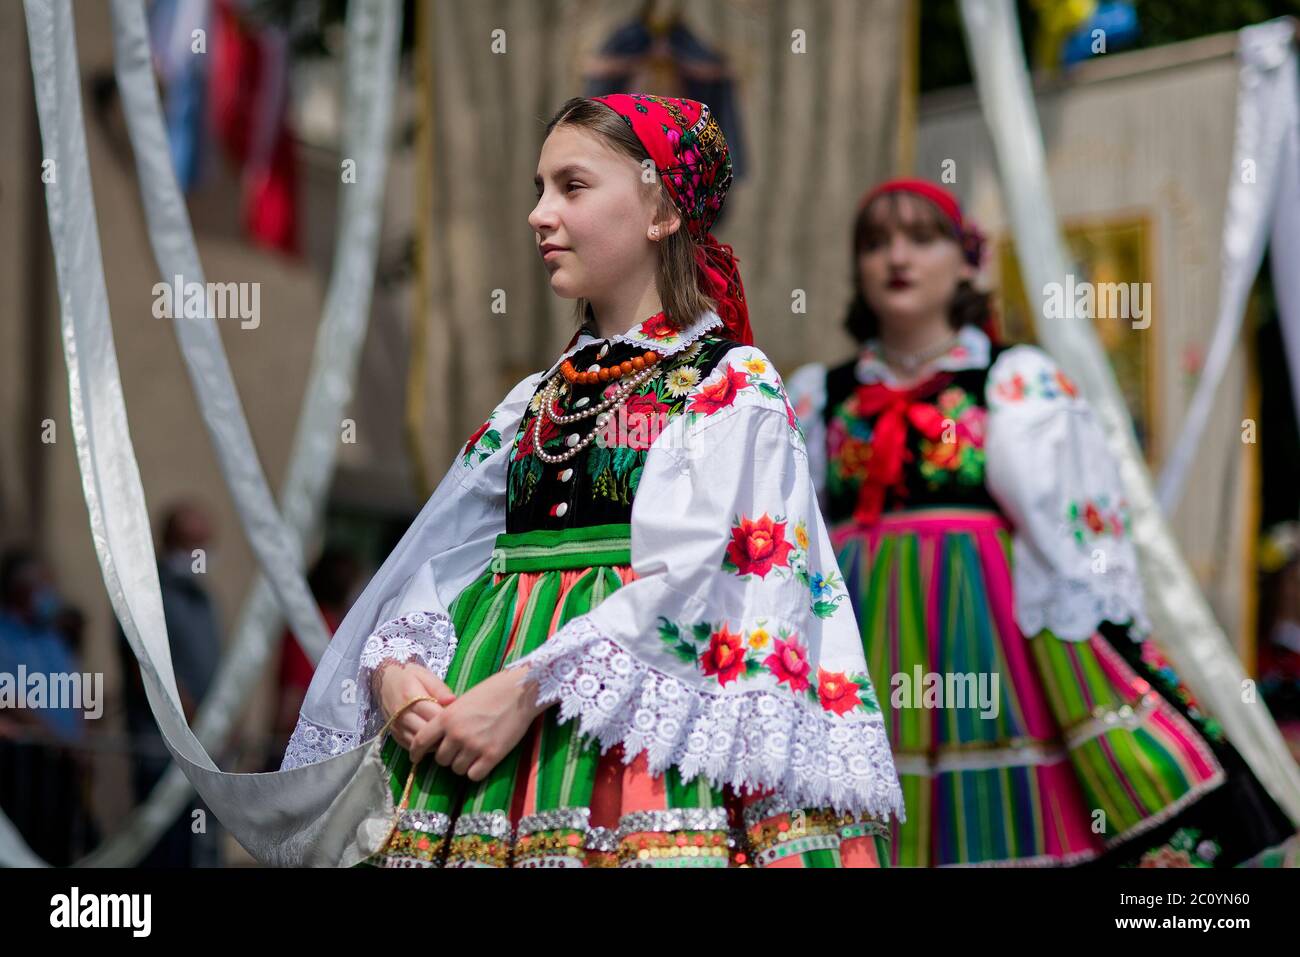 Lowicz, Poland - June 11 2020: An unidentified pretty young polish girl ...